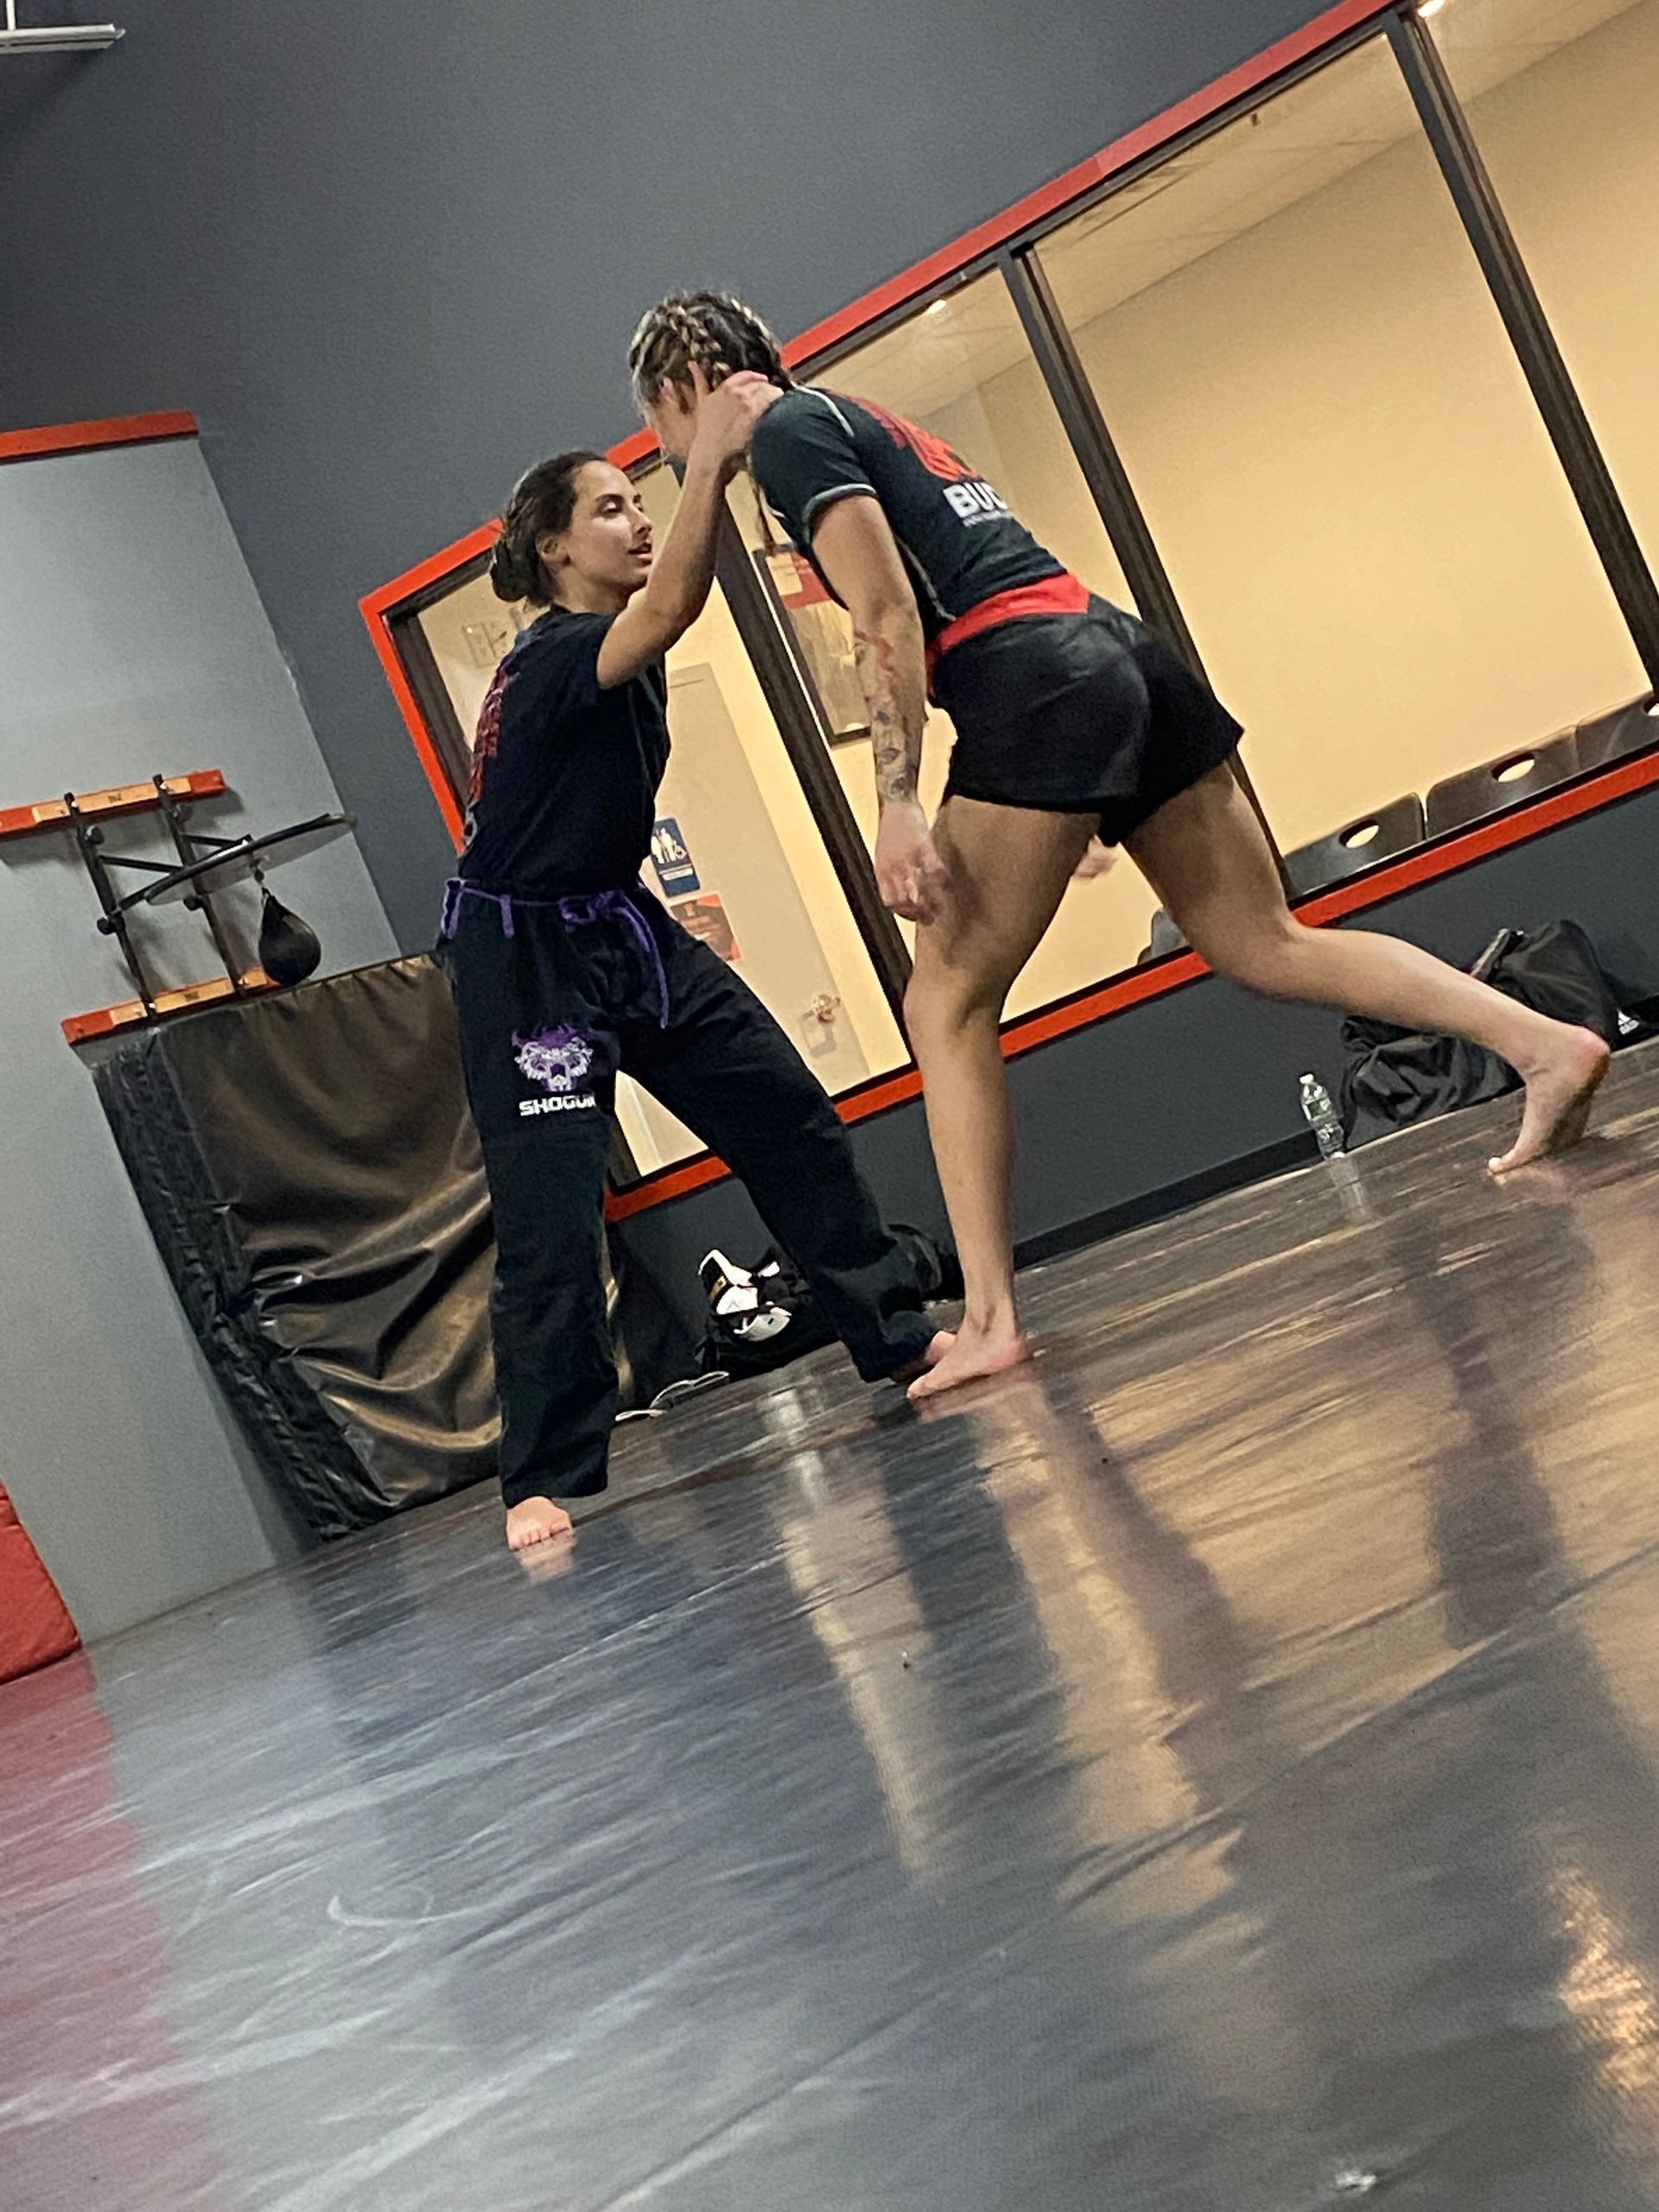 two women are wrestling on a mat in a gym .